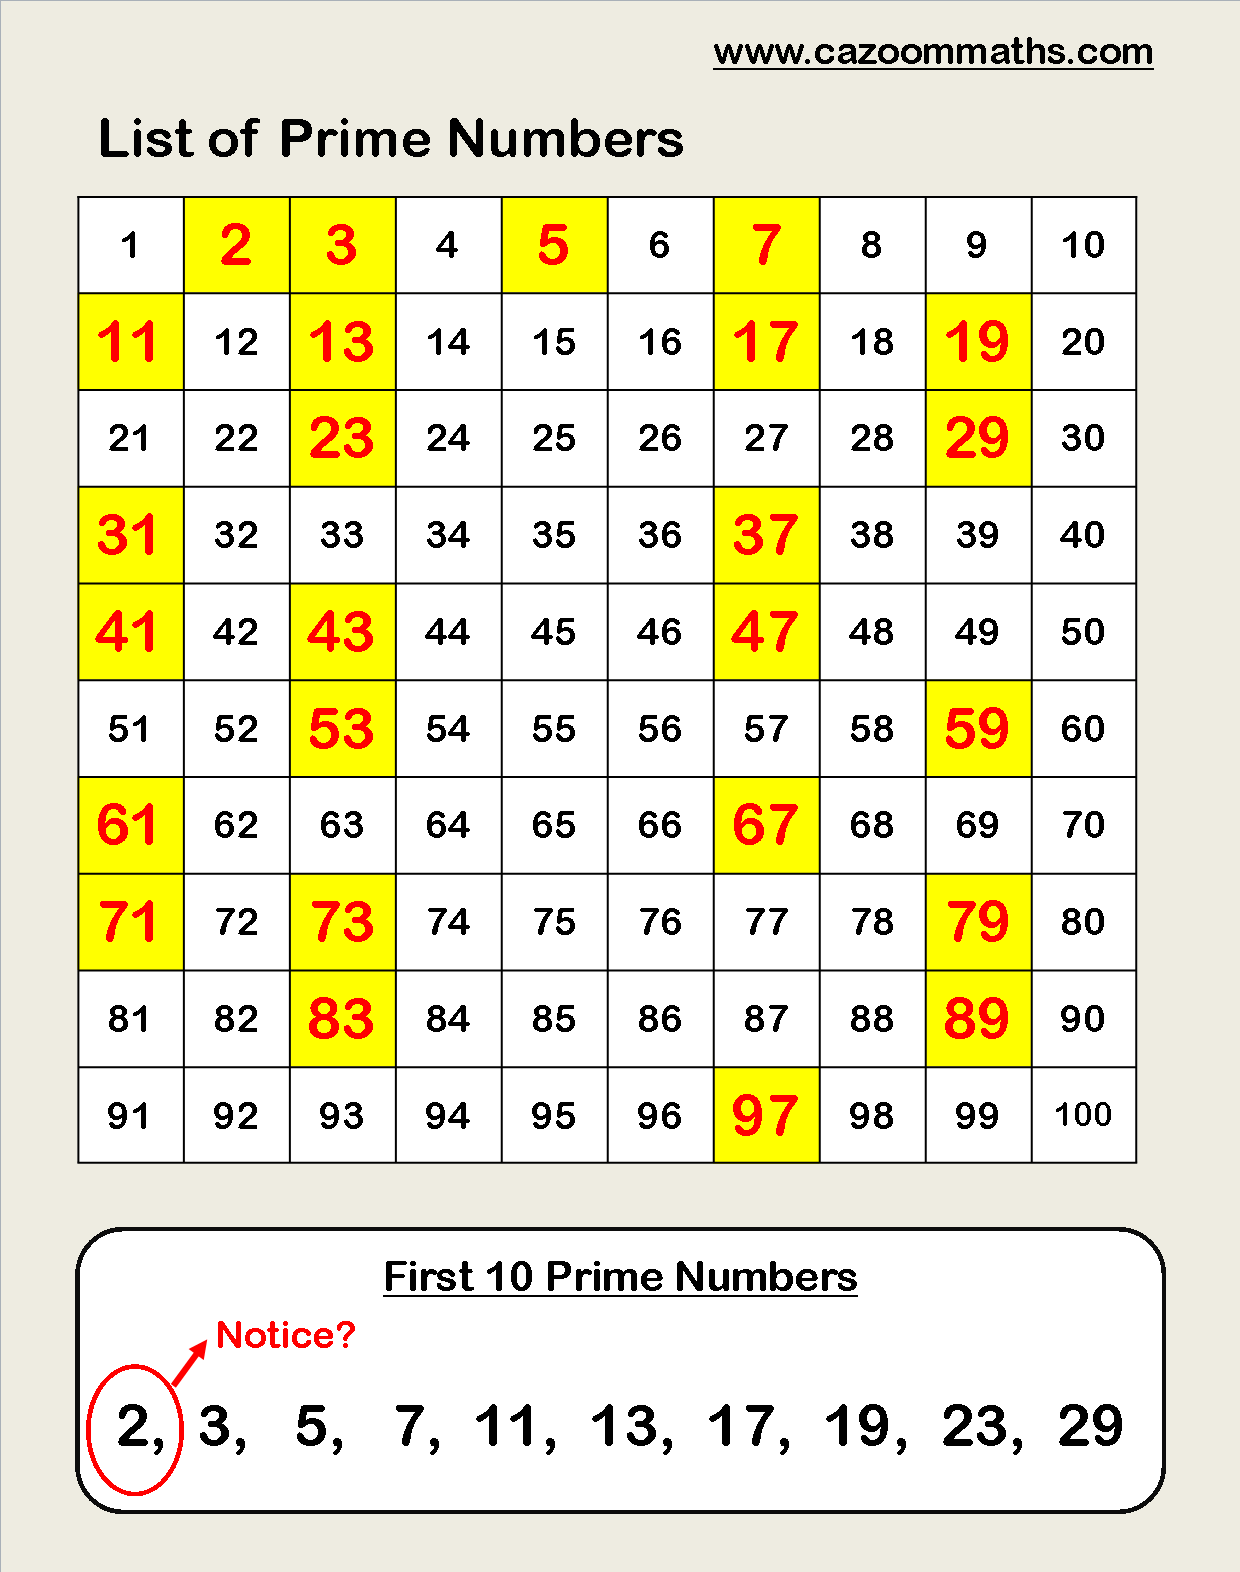 List of Prime Numbers | math | Pinterest | Prime numbers, Math and ...